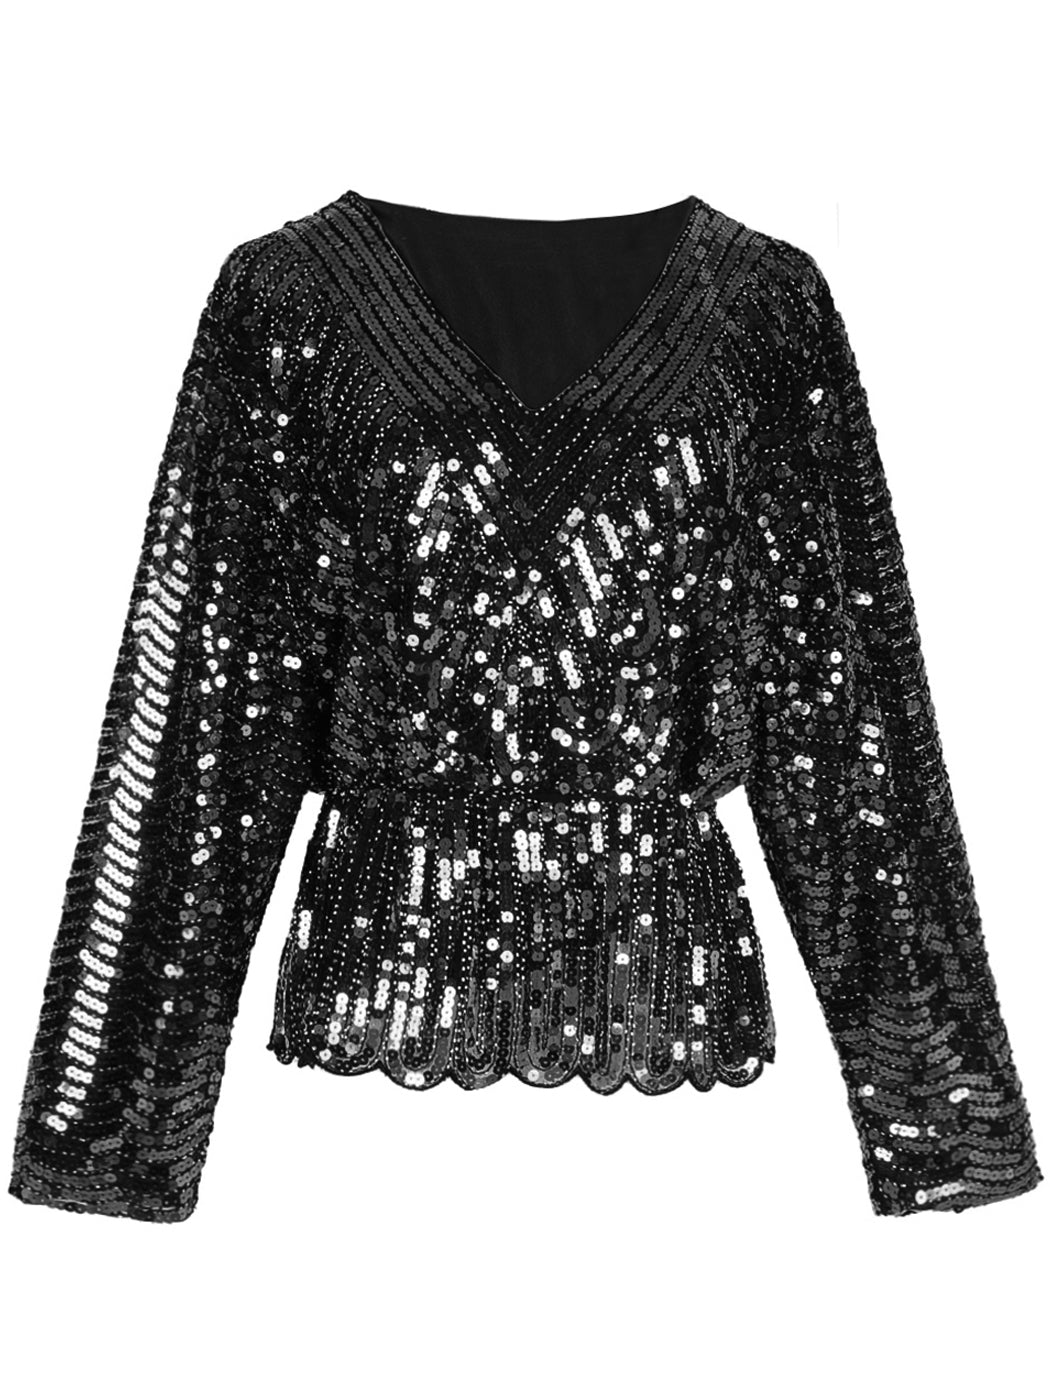 Anna-Kaci Womens 1920s Vintage Beaded Sparkly Sequin V Neck Long Sleeve Elastic Waist Batwing Party Tops